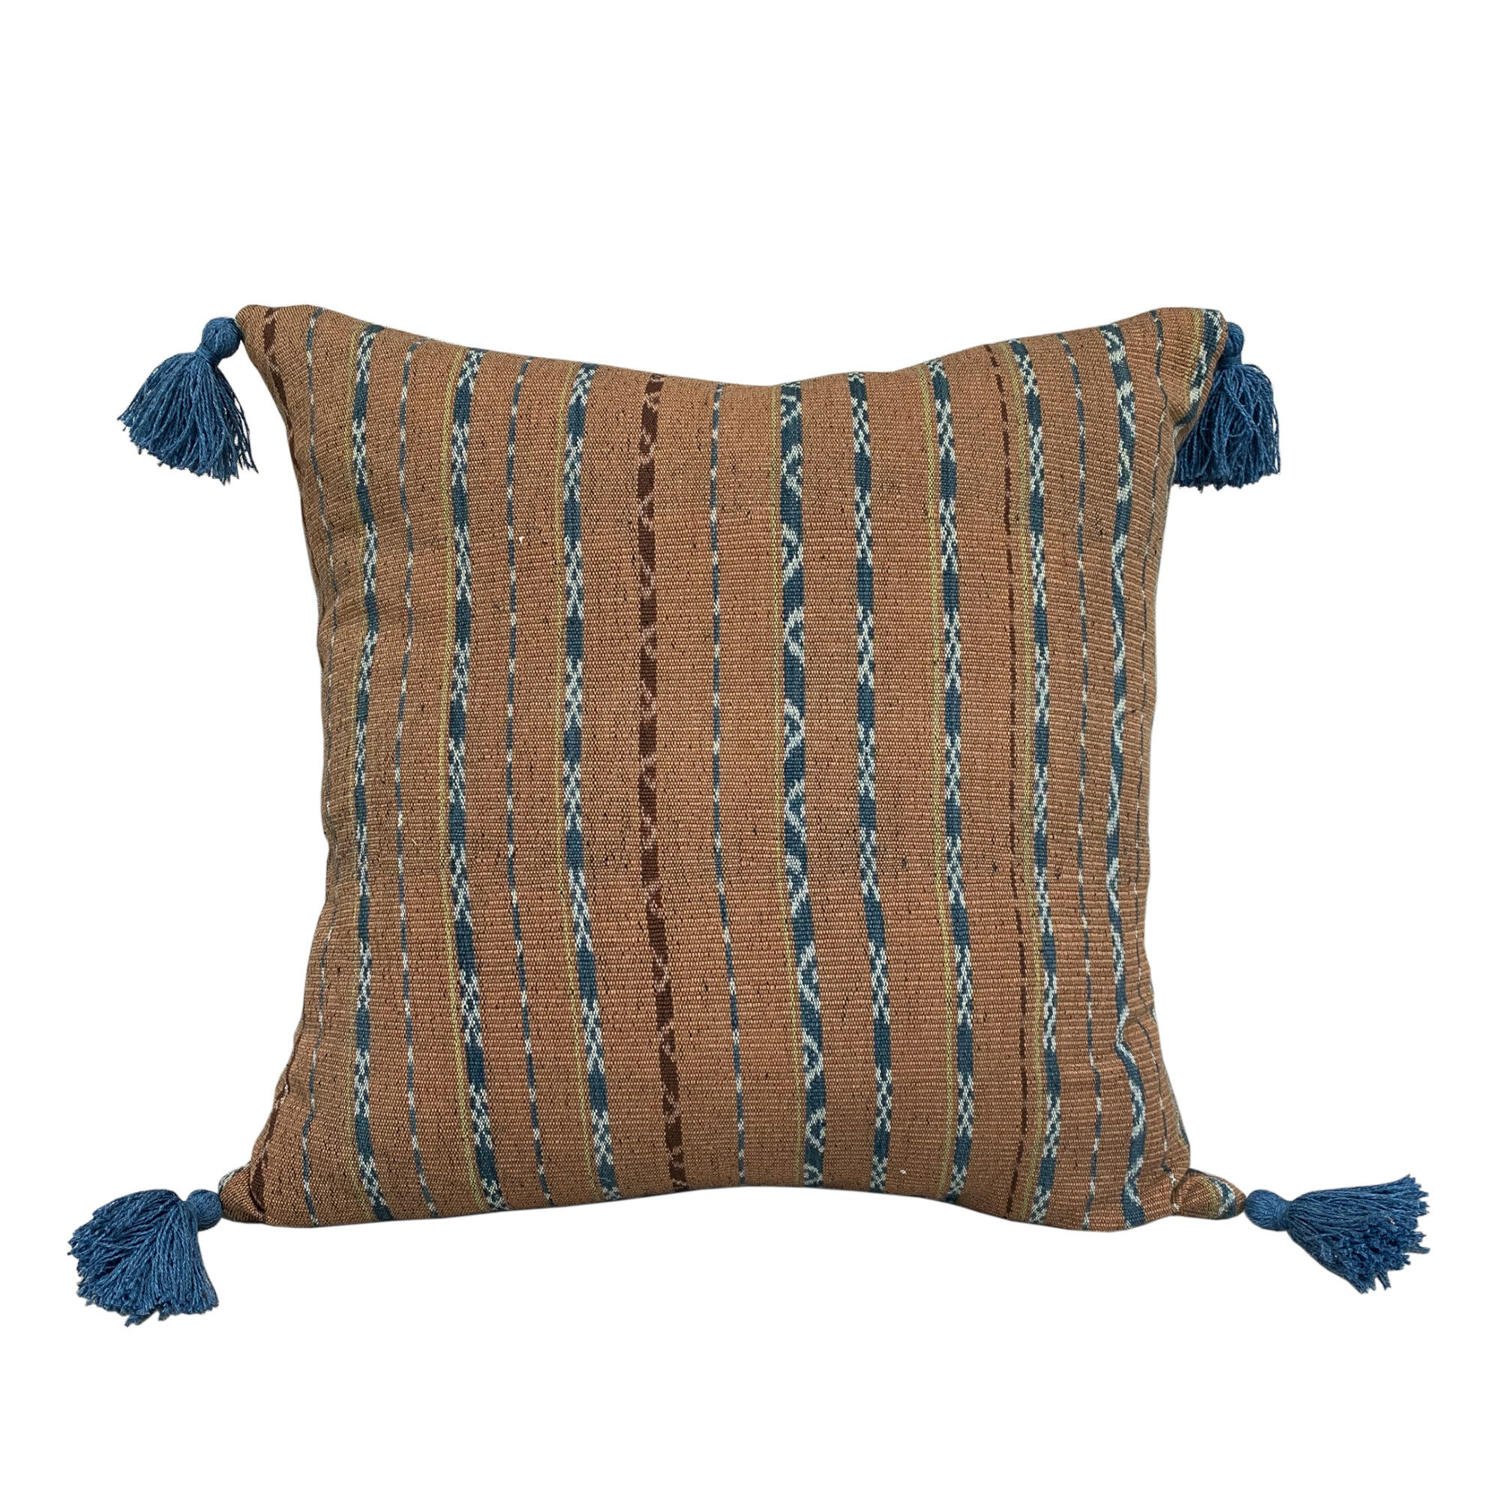 Ginger ikat cushion with blue tassels